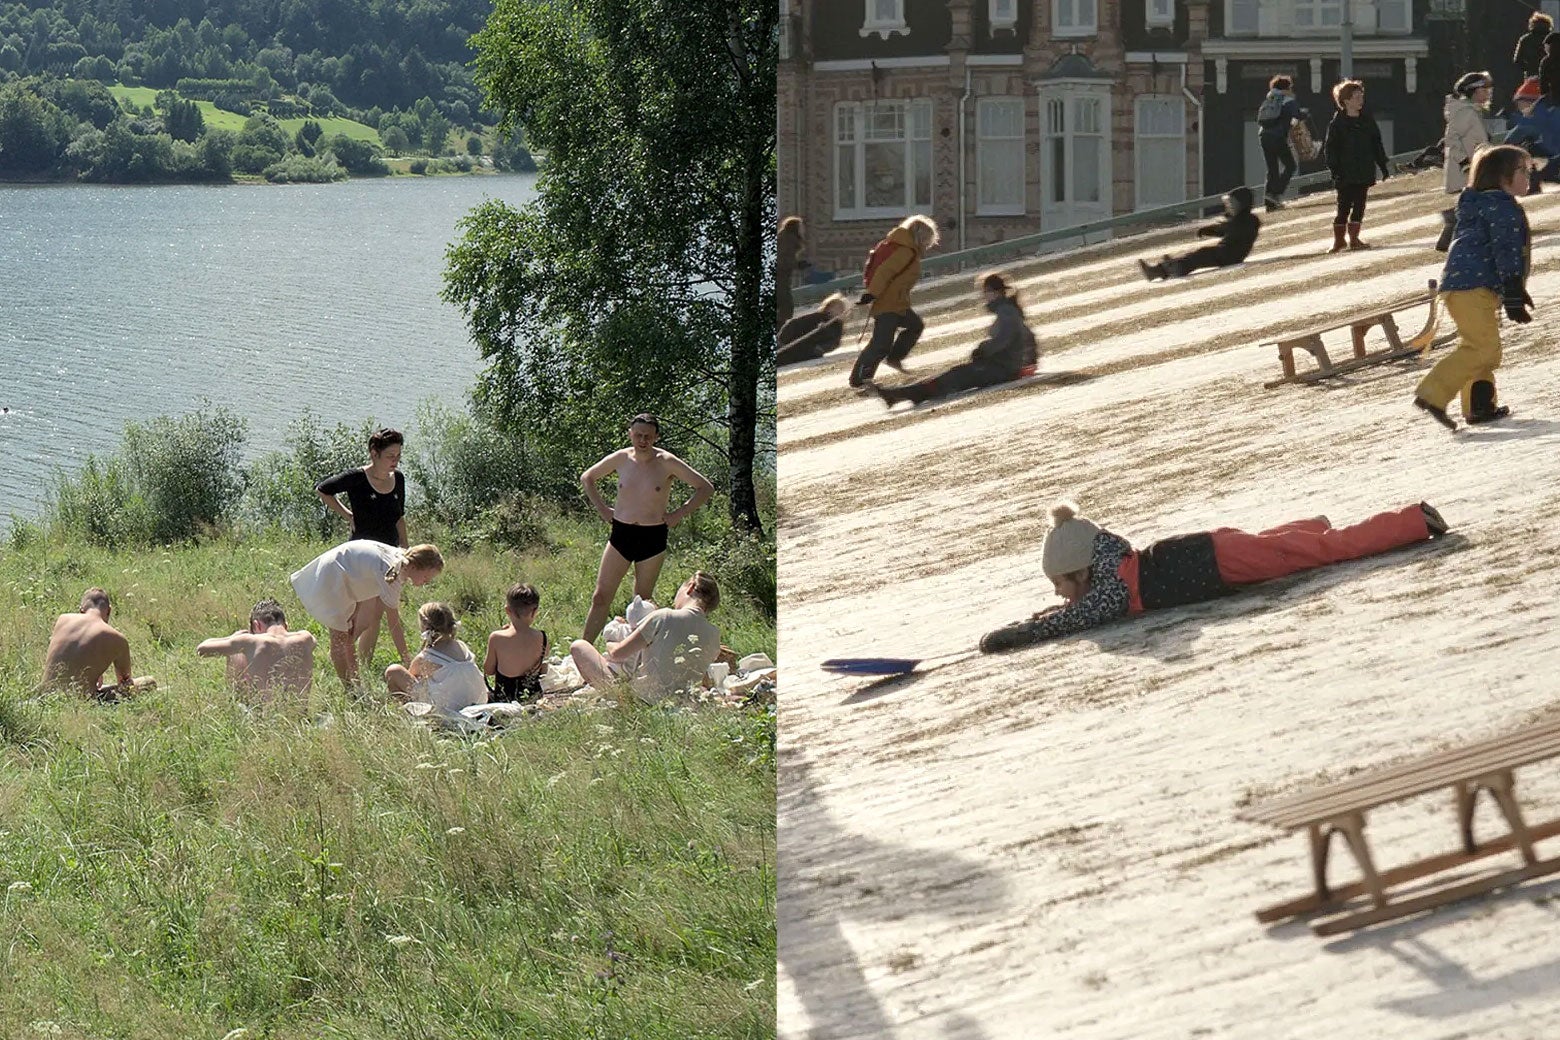 On the left, a pastoral scene shows a bunch of pale people lounging in a meadow on the side of a lake. The men are shirtless and appear to have just gone swimming. On the right, an almost ageless scene of a bunch of children riding toboggans down a snowy city hillside.